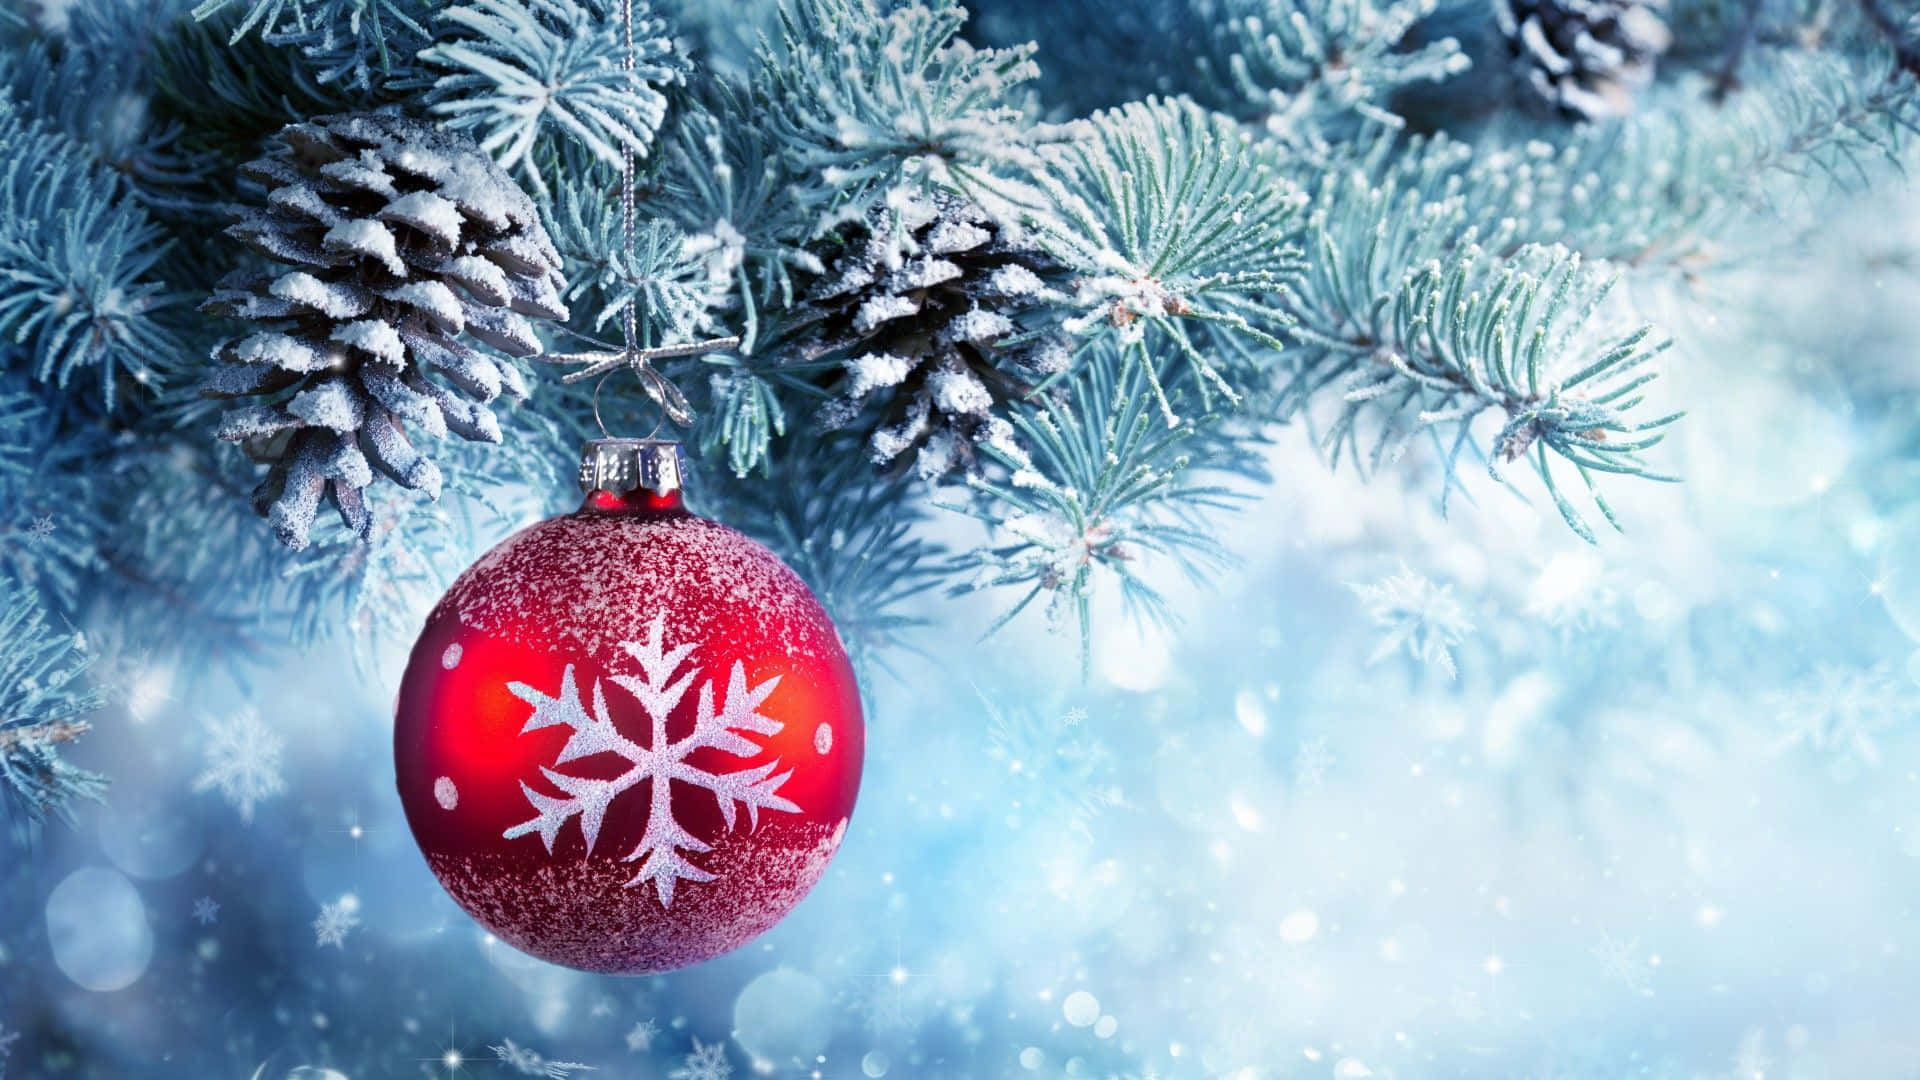 Aesthetic Christmas Red Ornaments Laptop Wallpaper